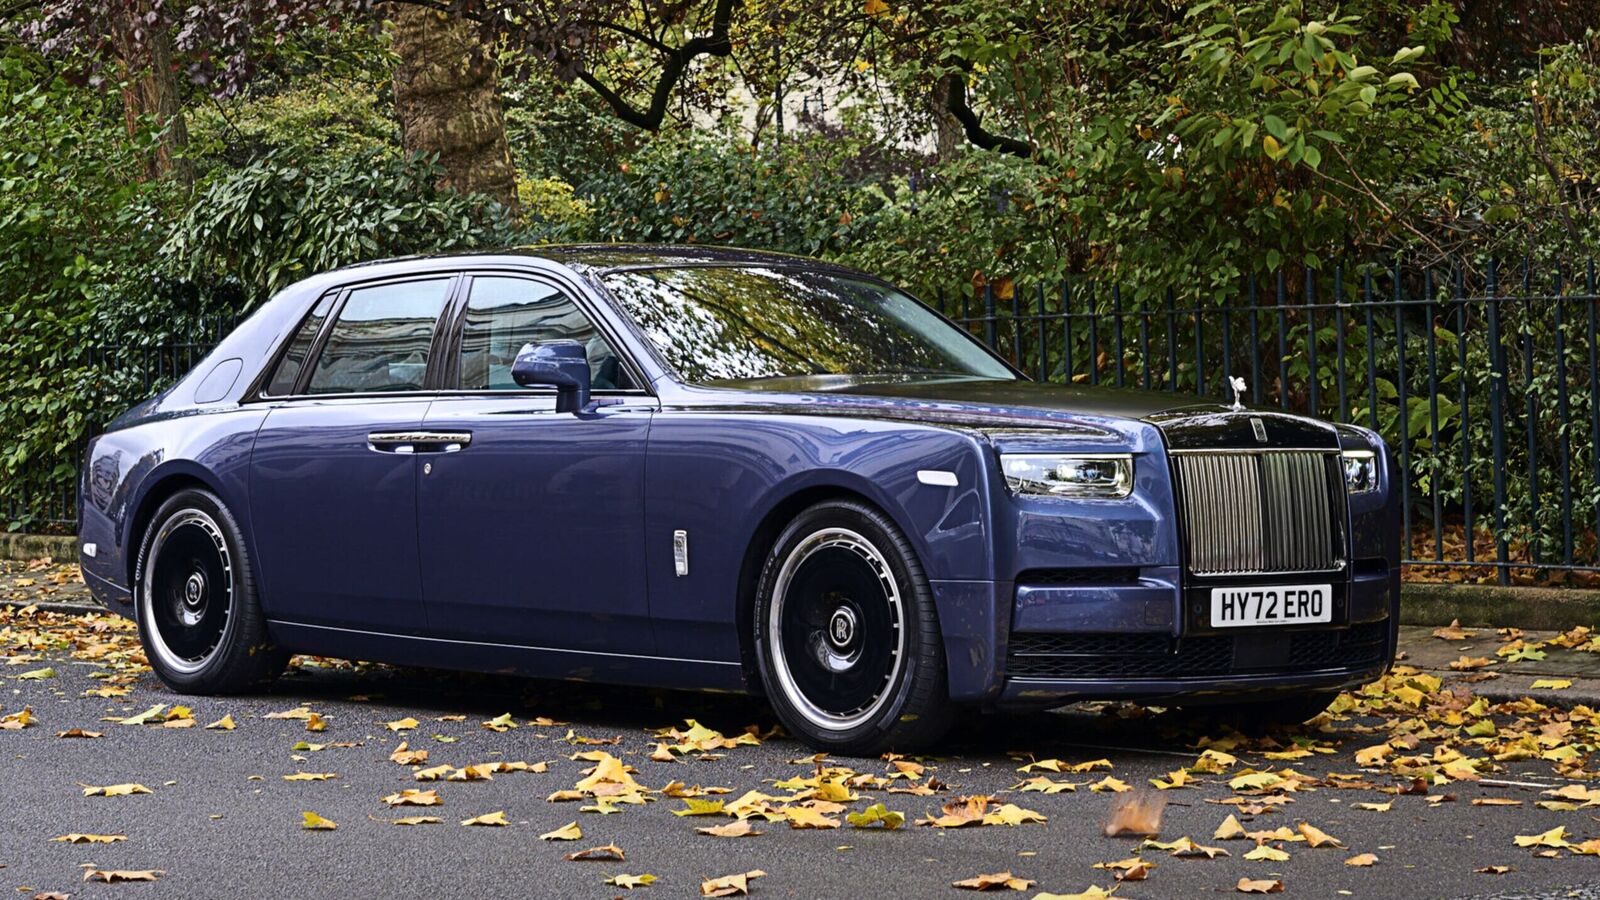 More ultraexclusive RollsRoyce models on the way  Autocar